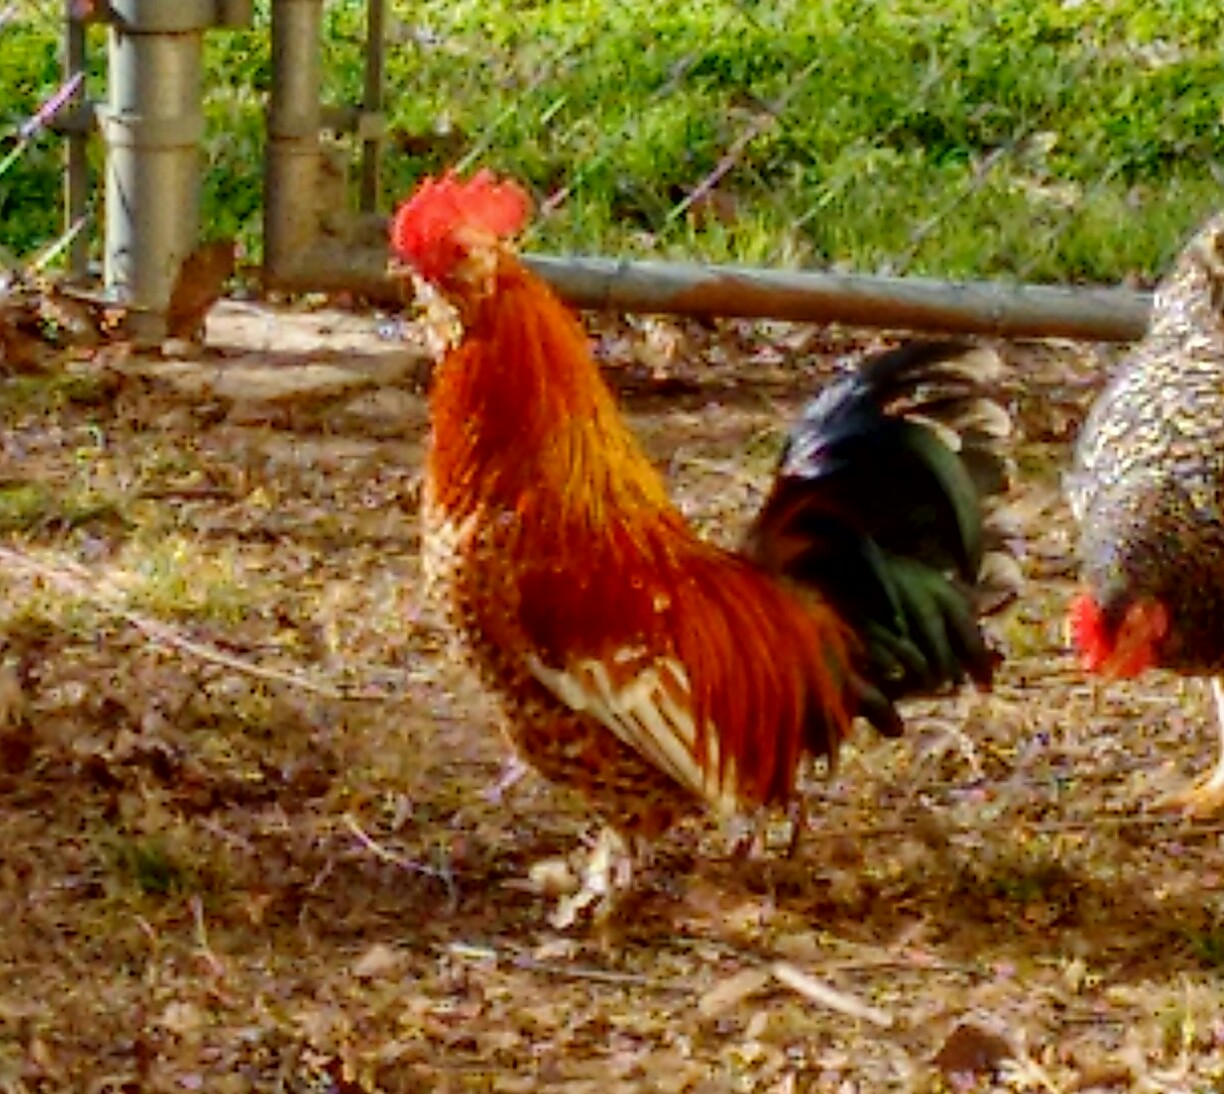 Our bantam roo, 3-4 pounds tops! Quite excitable.